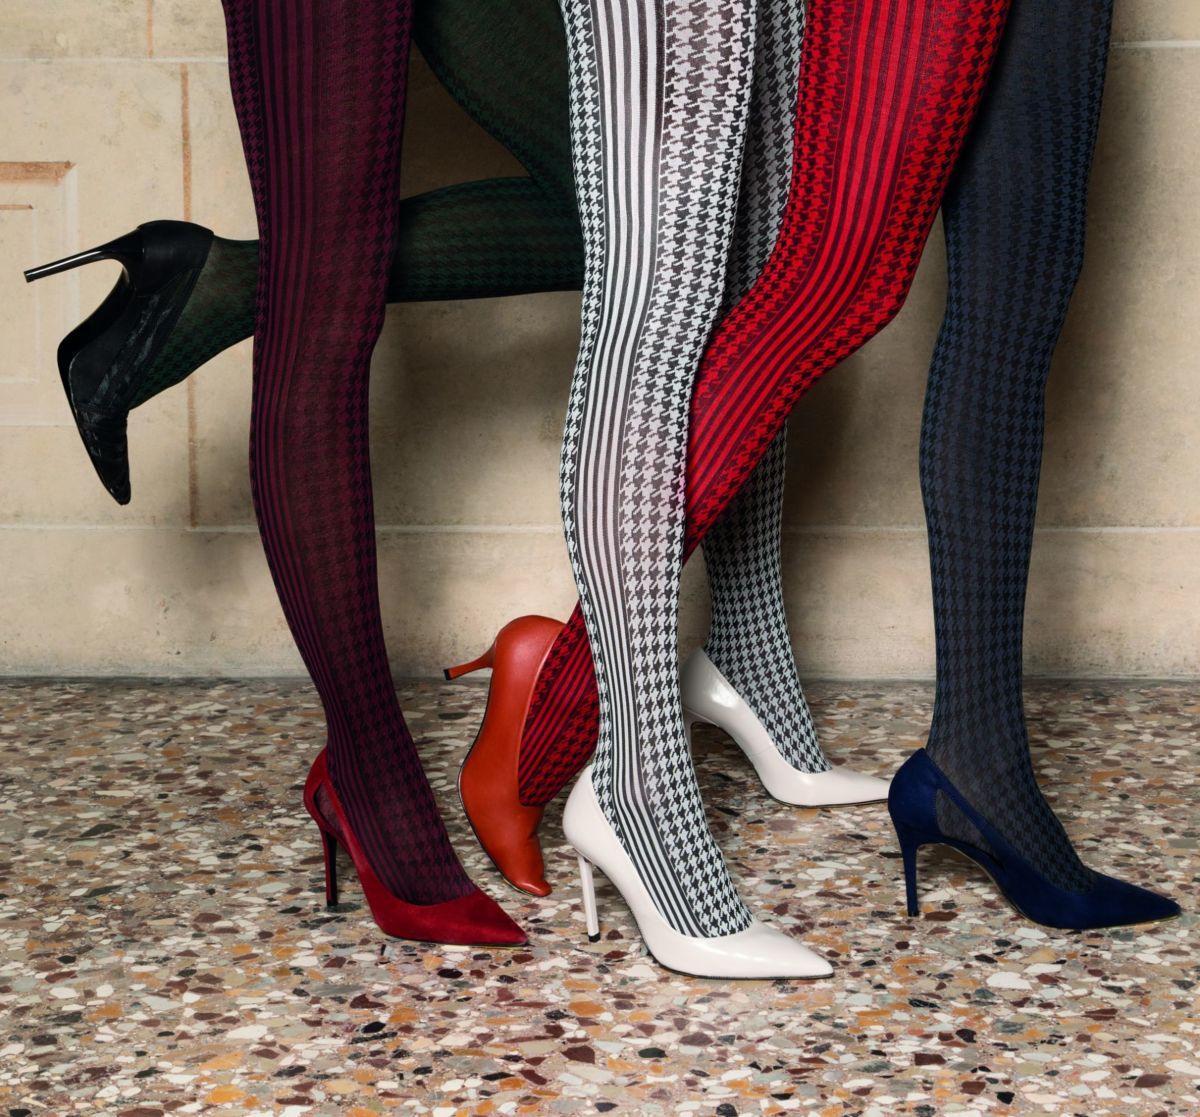 Soft matte opaque fashion tights with black woven houndstooth pattern and side stripes. Available in grey and white.